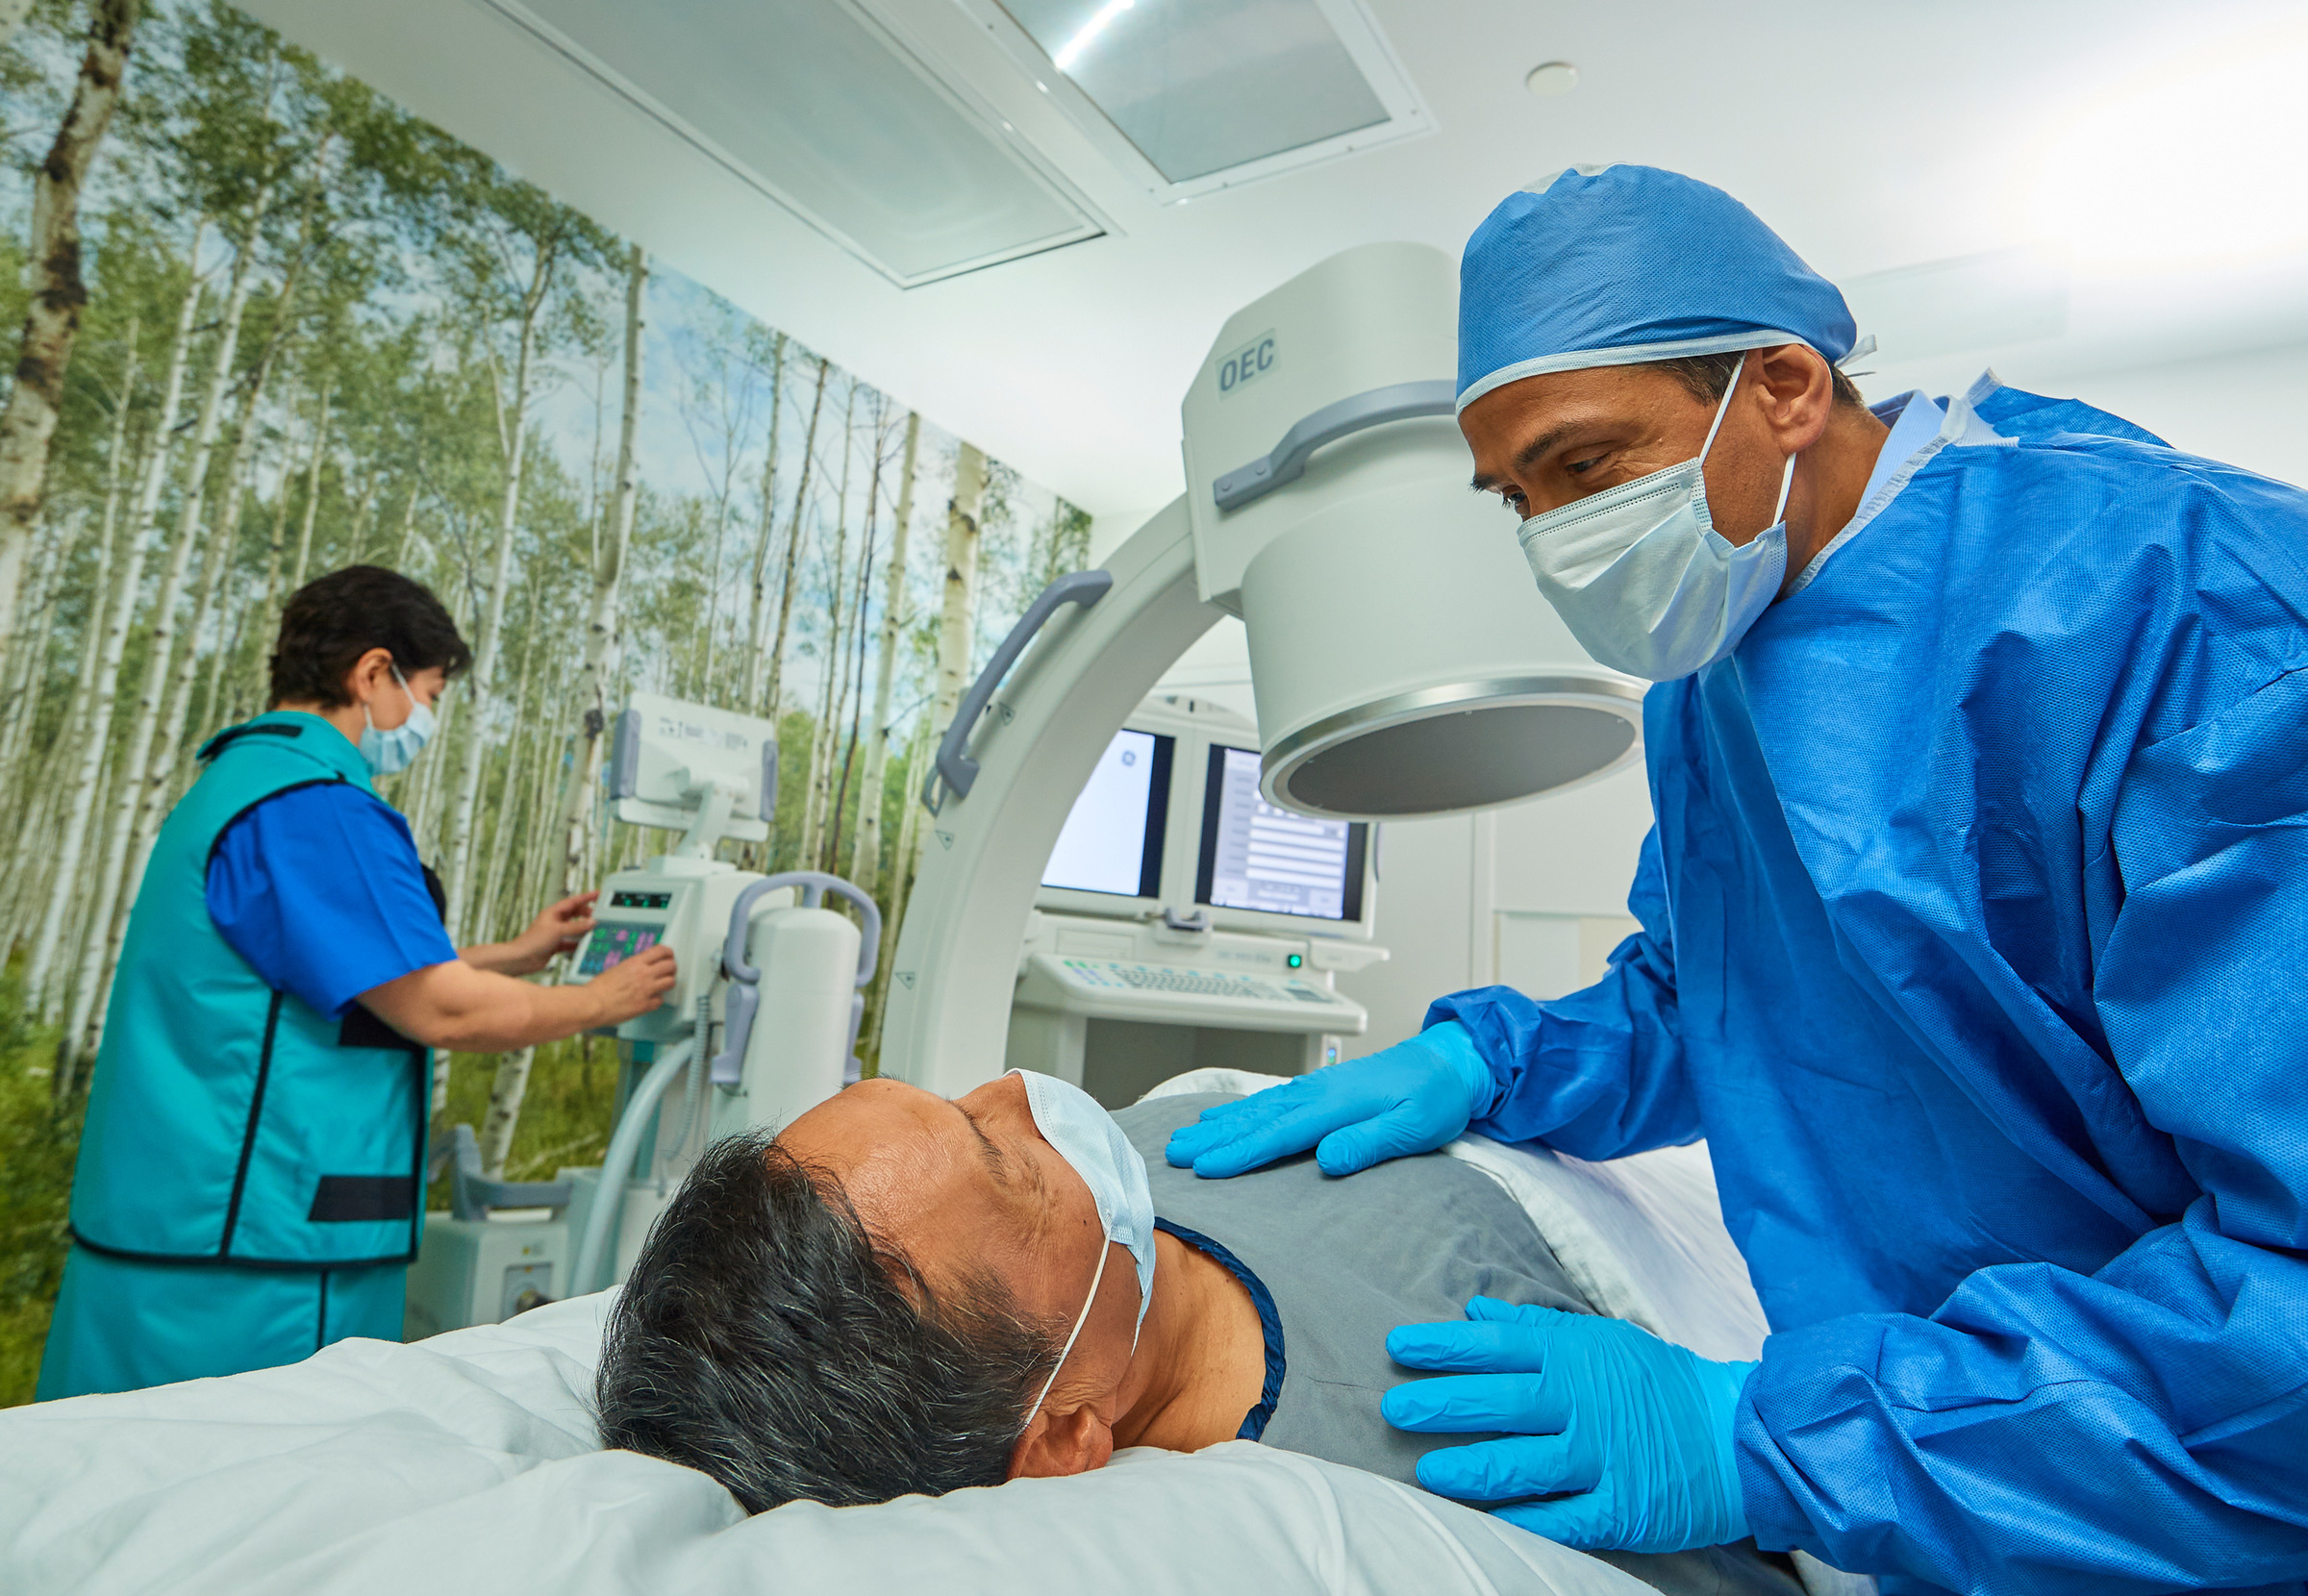 What to expect during radiation therapy